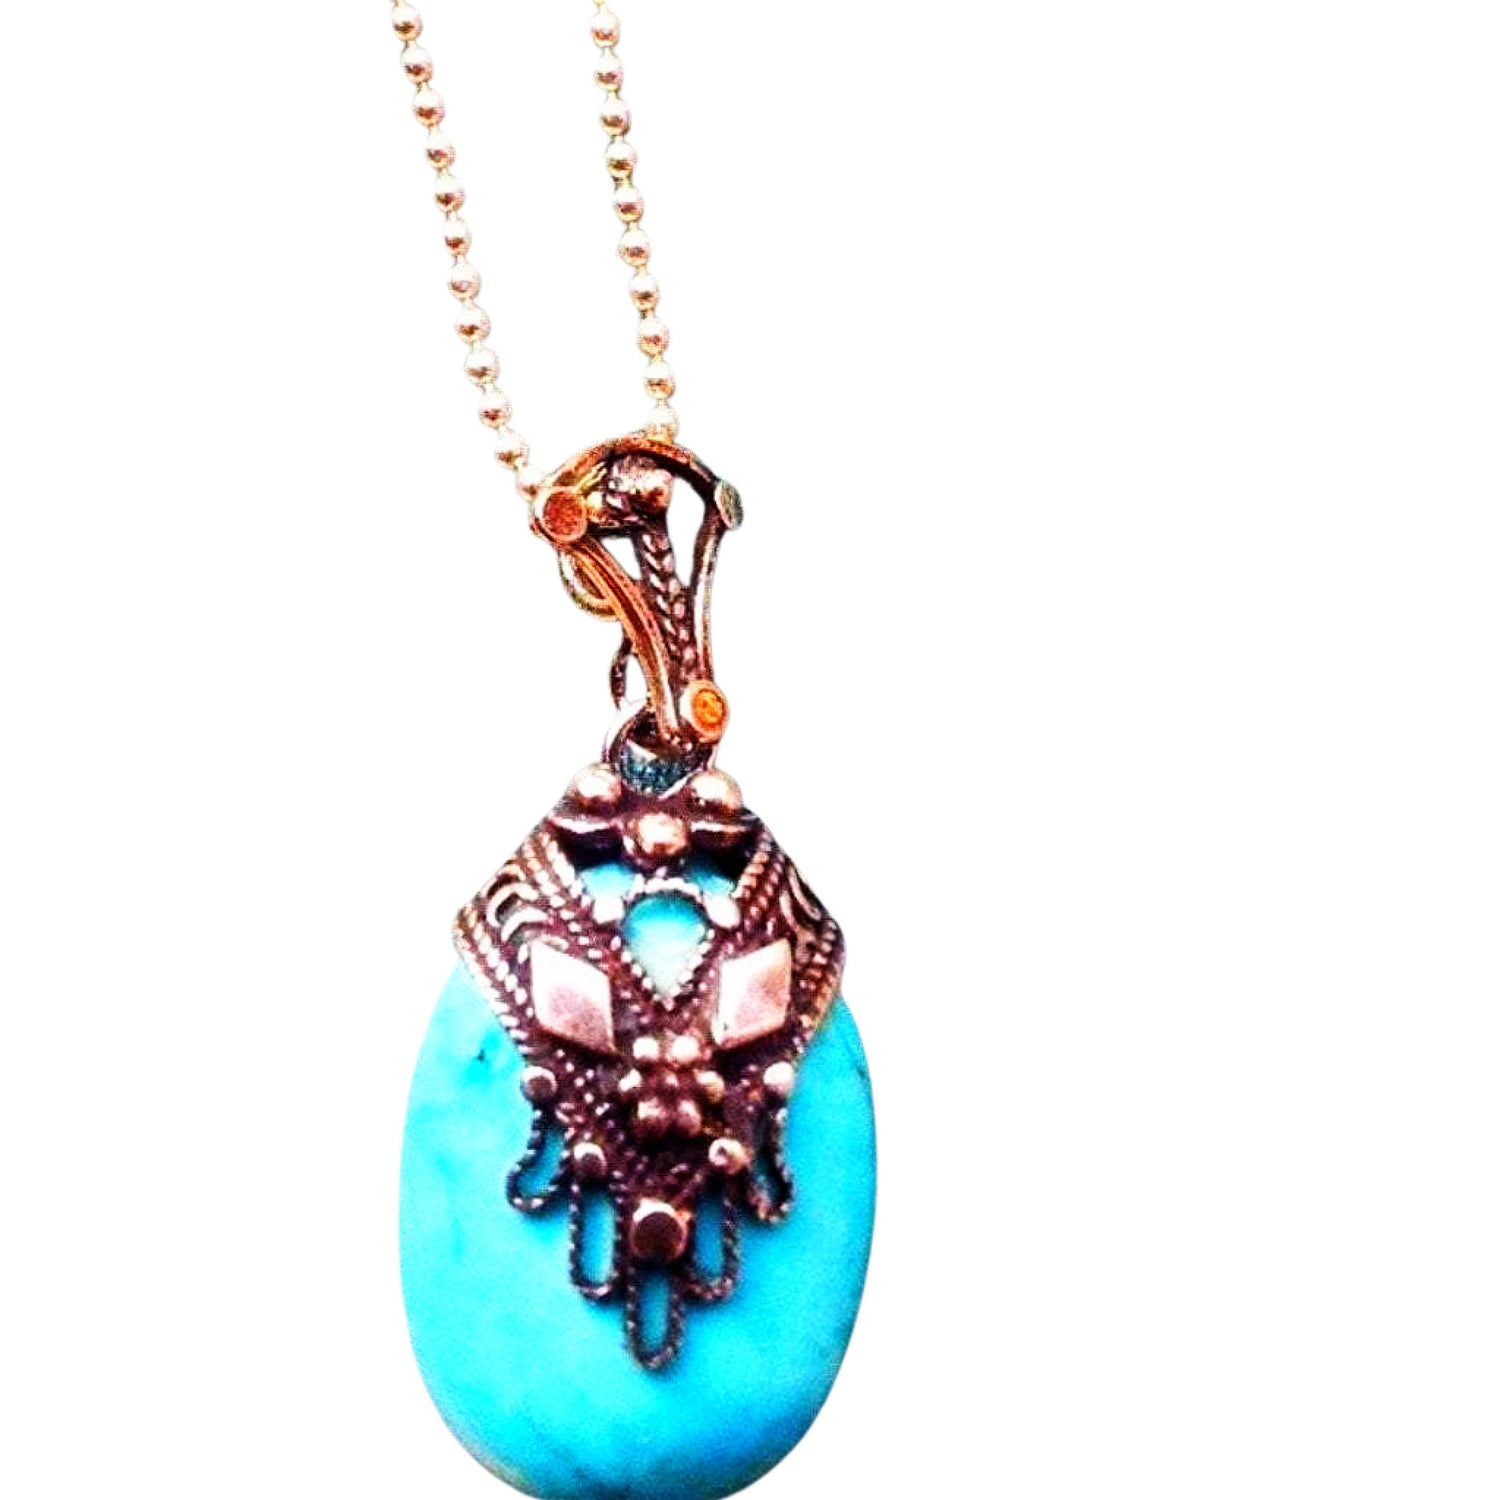 Bluenoemi Jewelry Necklaces Sterling Silver Chain with Pendant Turquoise / Lava / Amethyst/ Coral with a gorgeous filigree hamsa